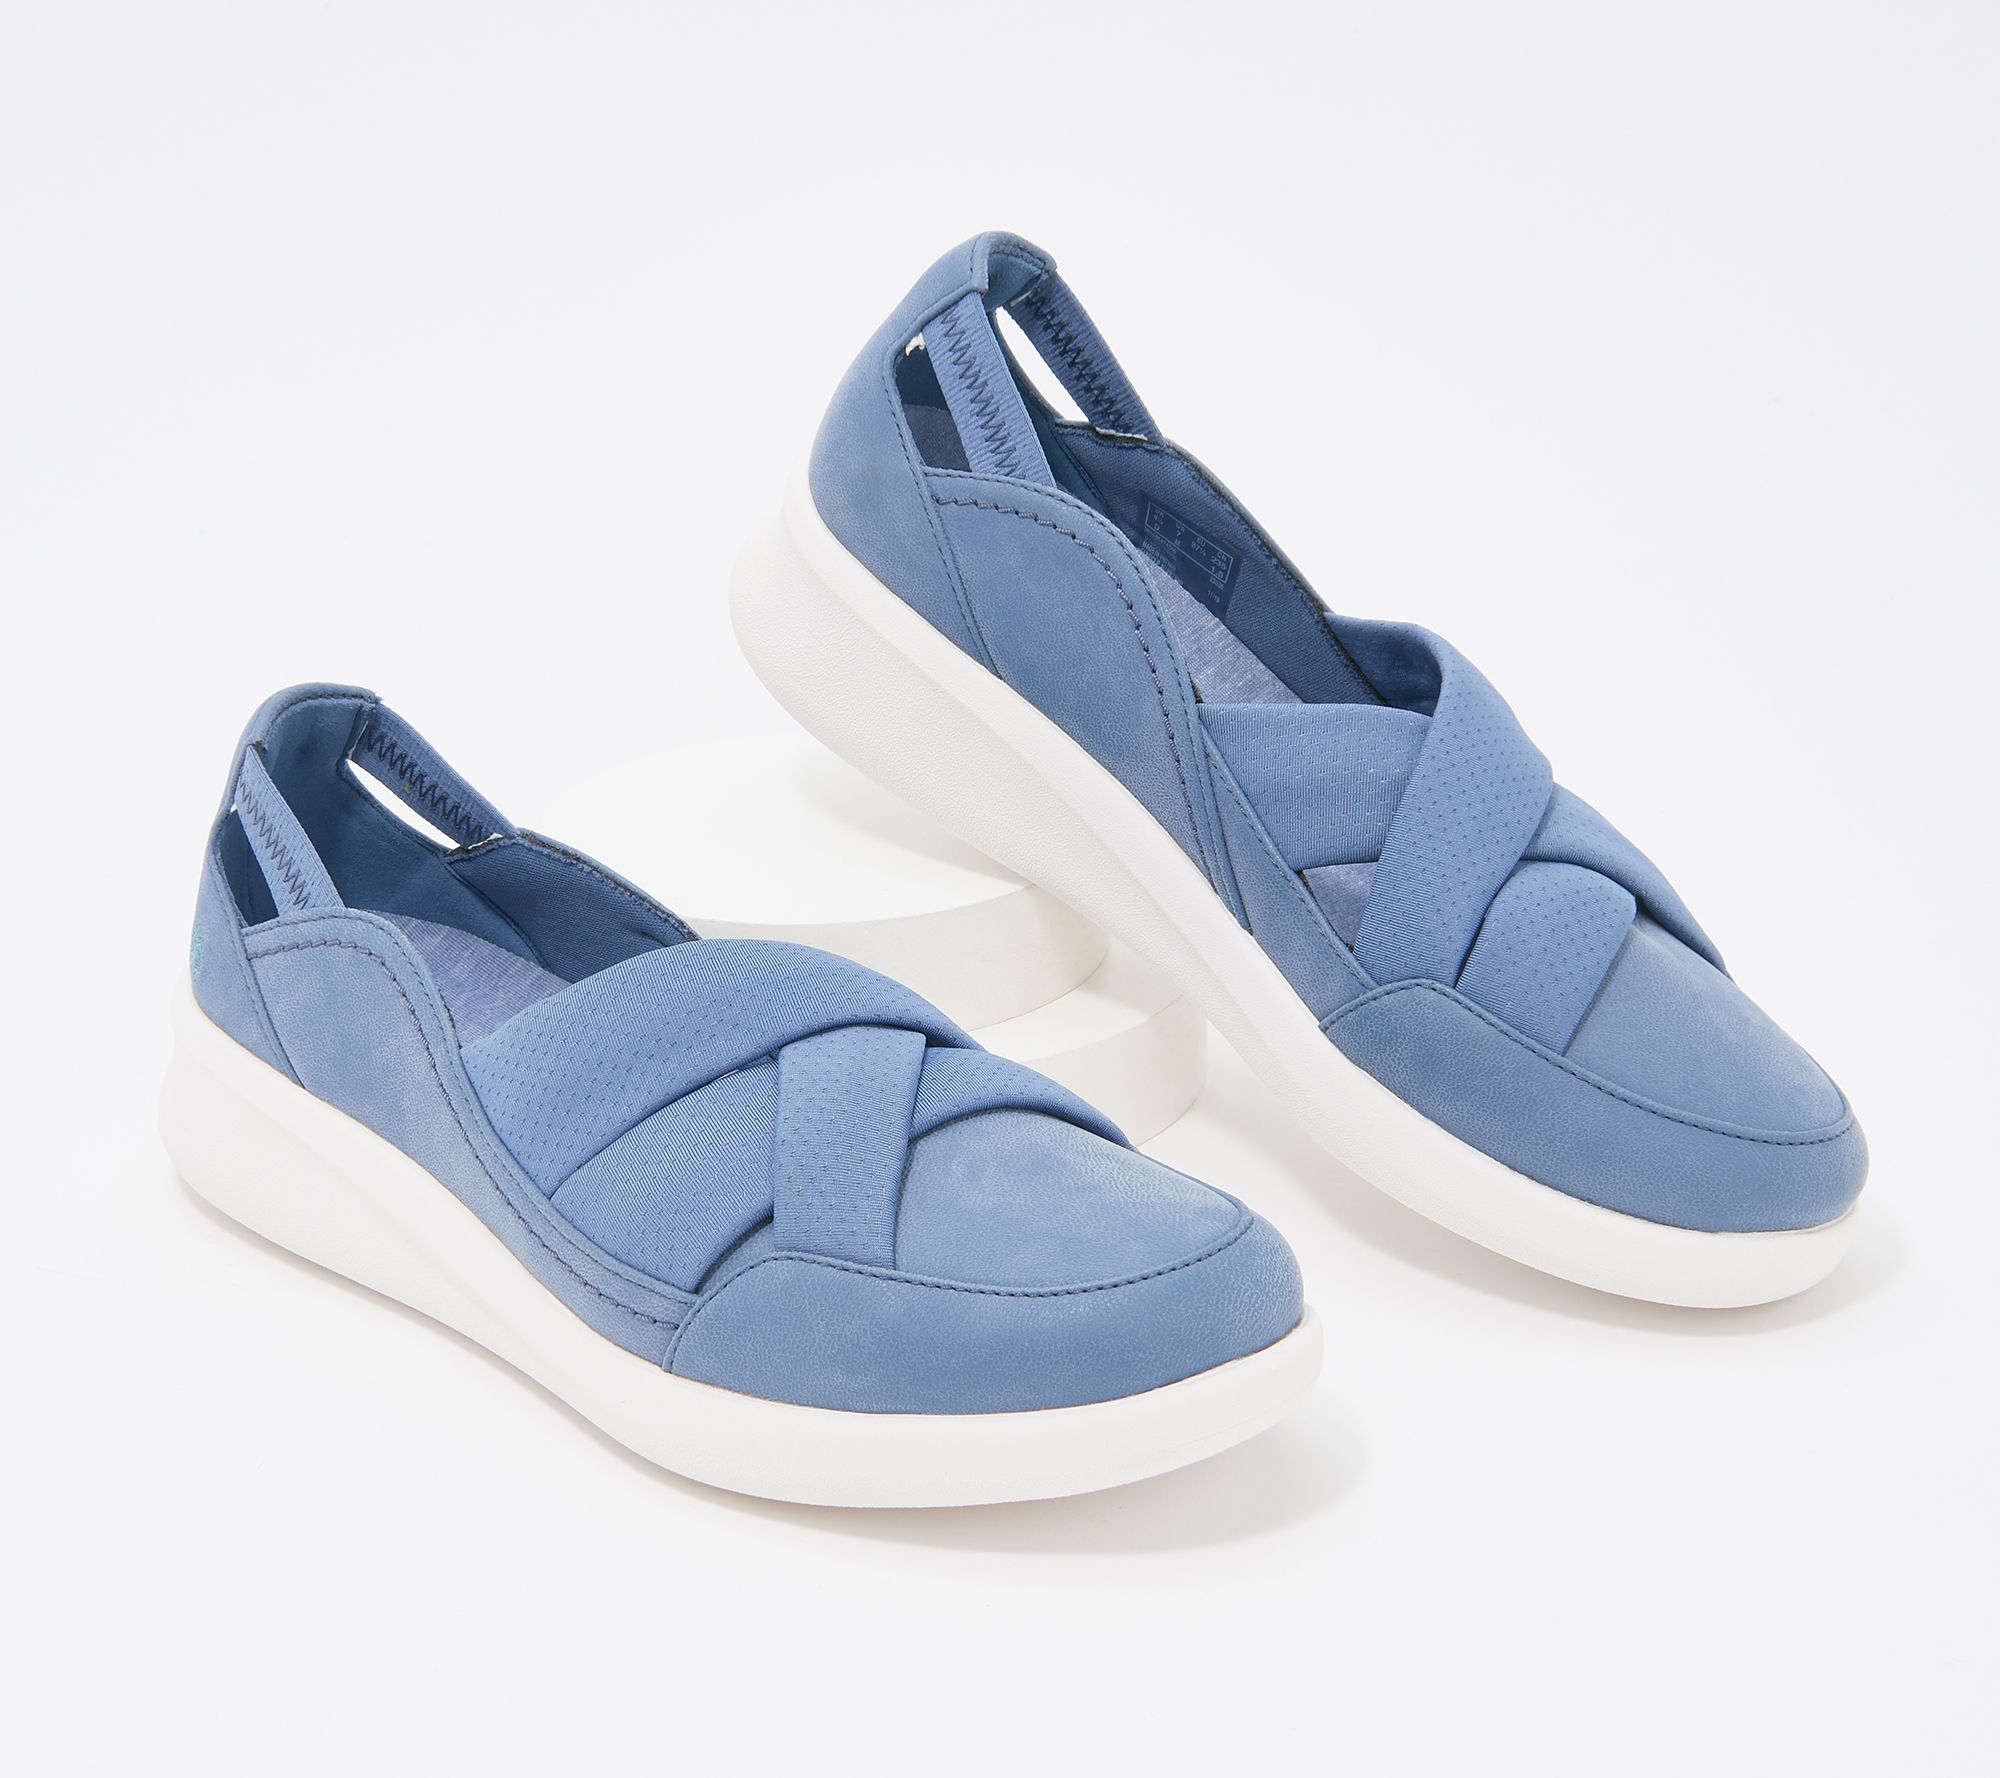 CLOUDSTEPPERS by Clarks Slip-on Shoes 